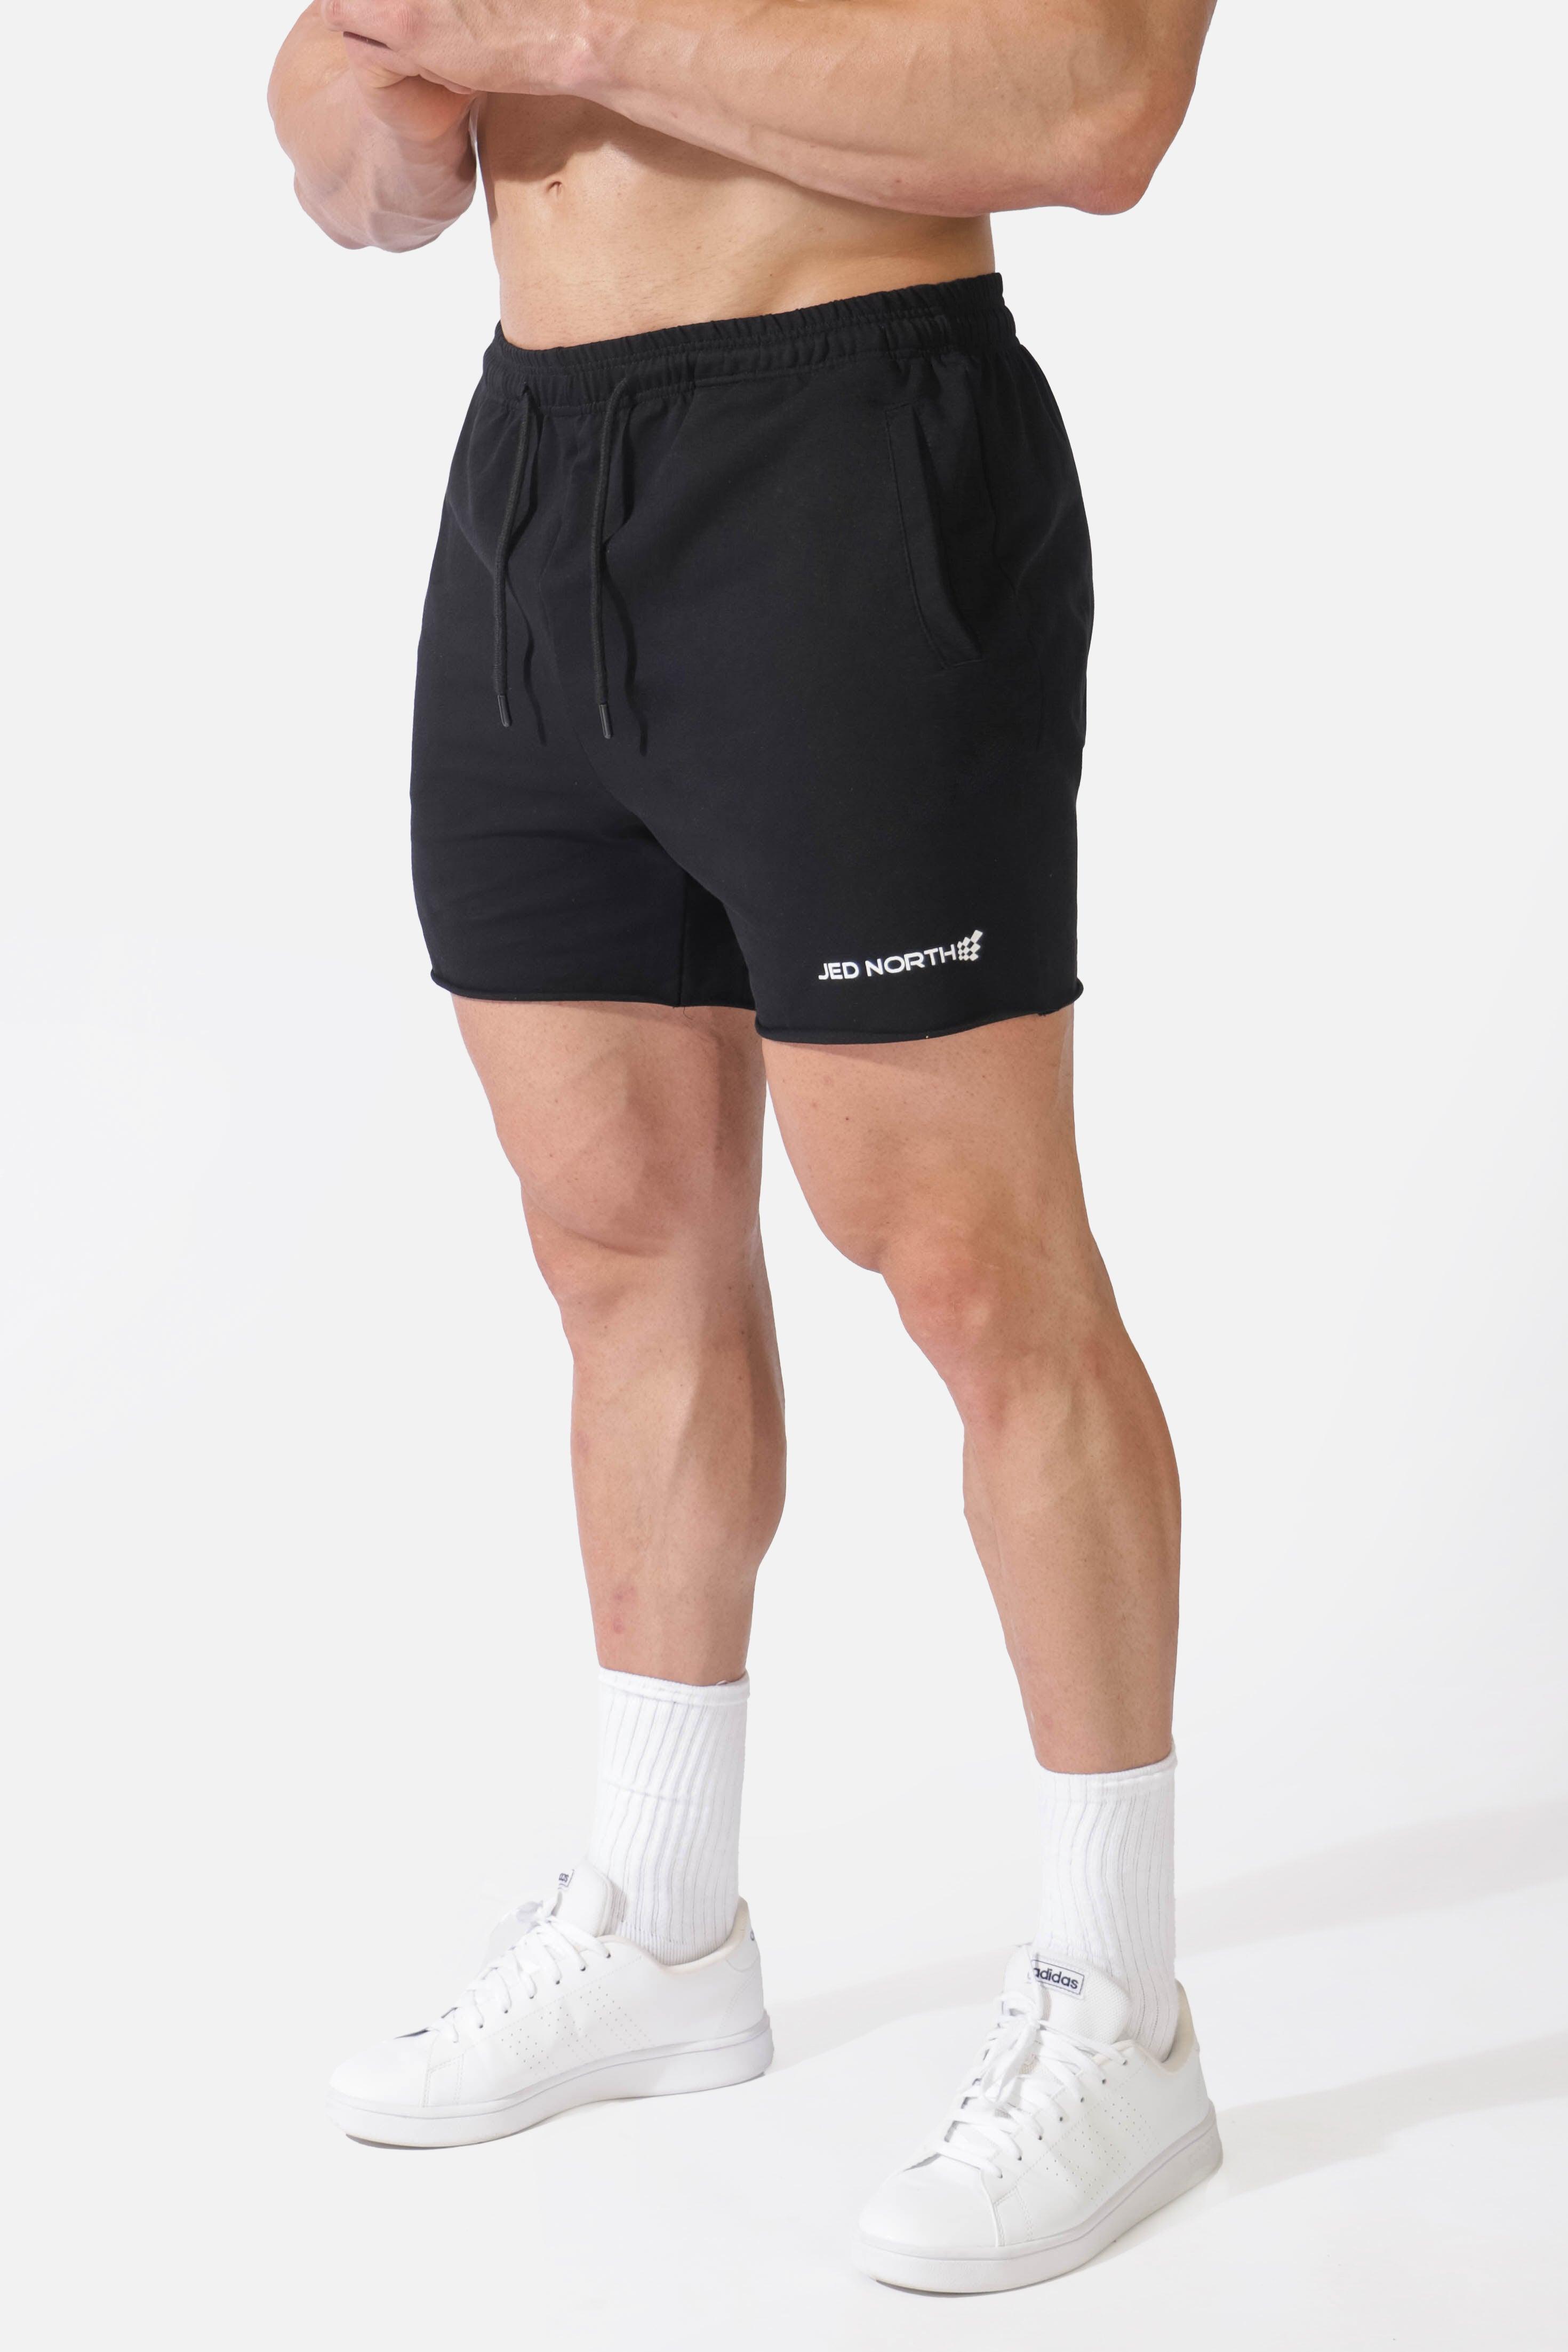 Workout Shorts for Men Bodybuilding & Fitness Jed North